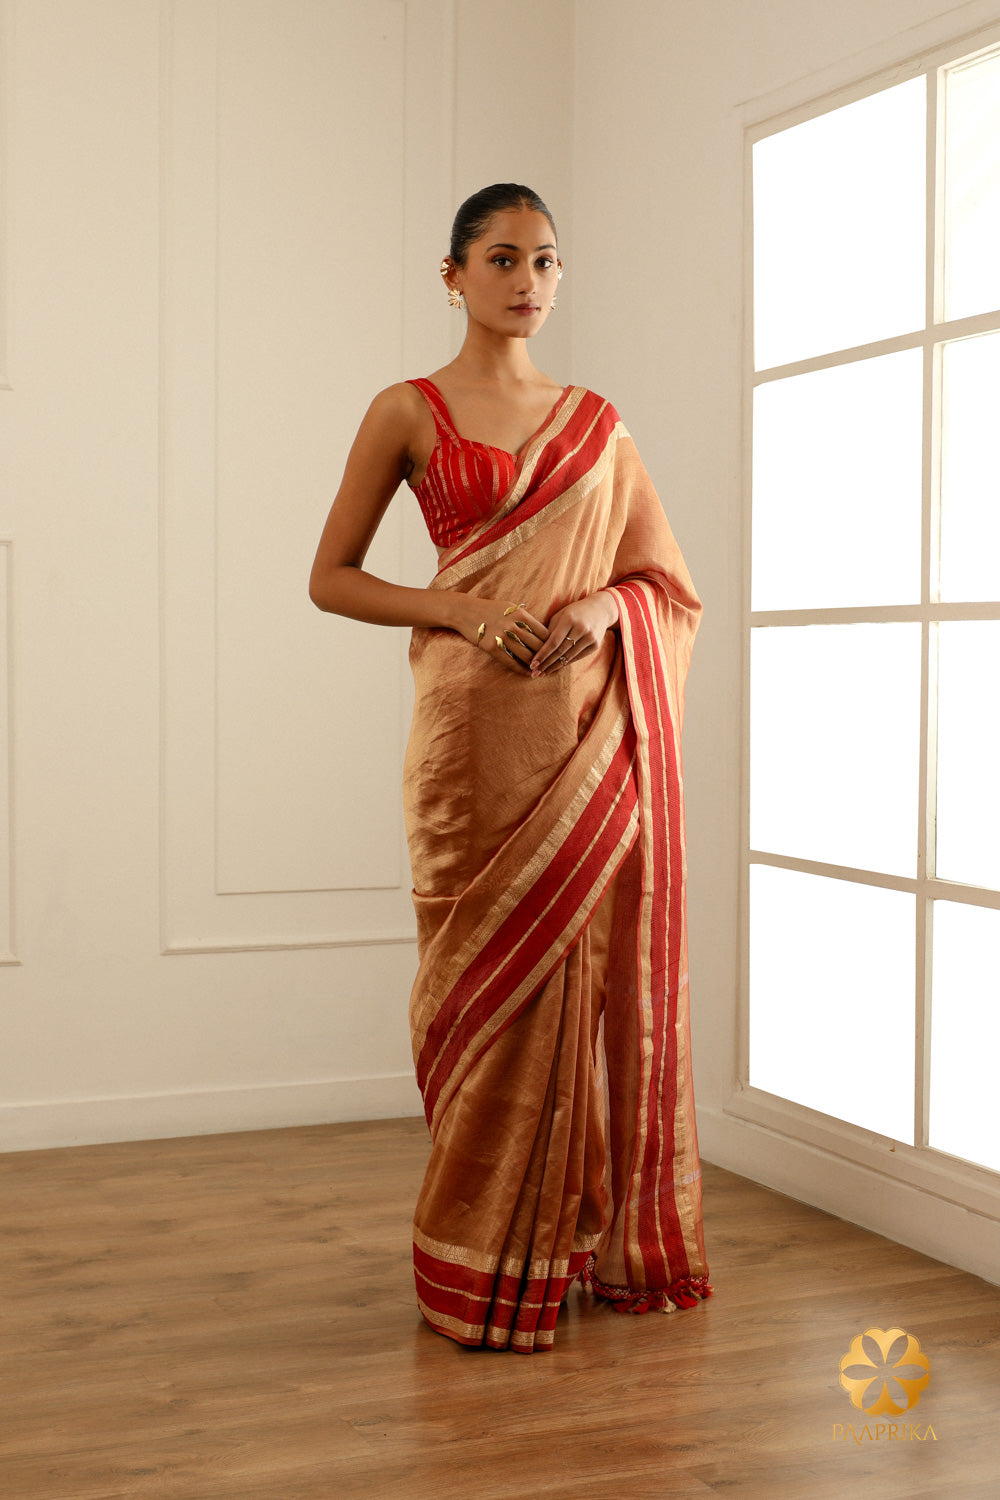  A full-length shot of a woman gracefully wearing the Burgundy Tissue Saree, showcasing its beauty and sophistication.